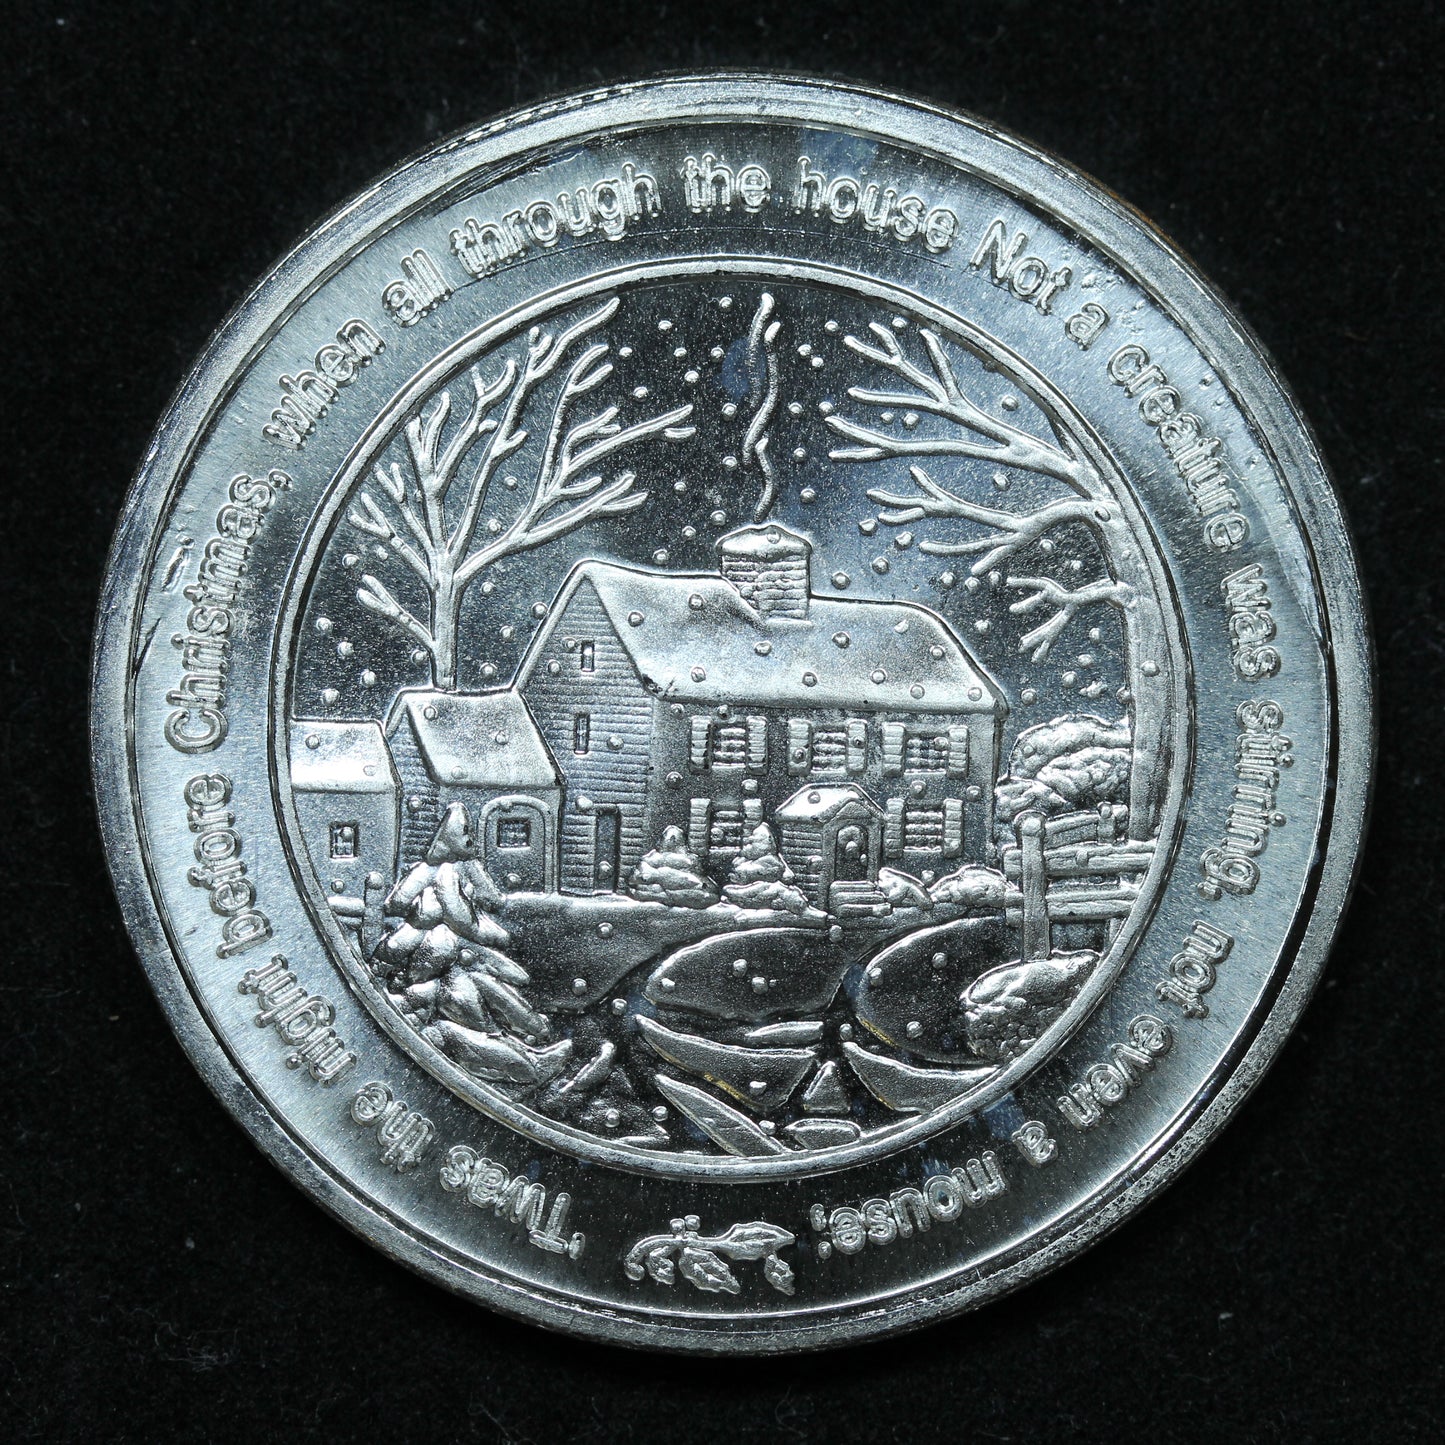 1 oz .999 Fine Silver Round Merry Christmas 'Twas The Night Before Christmas w/ Capsule